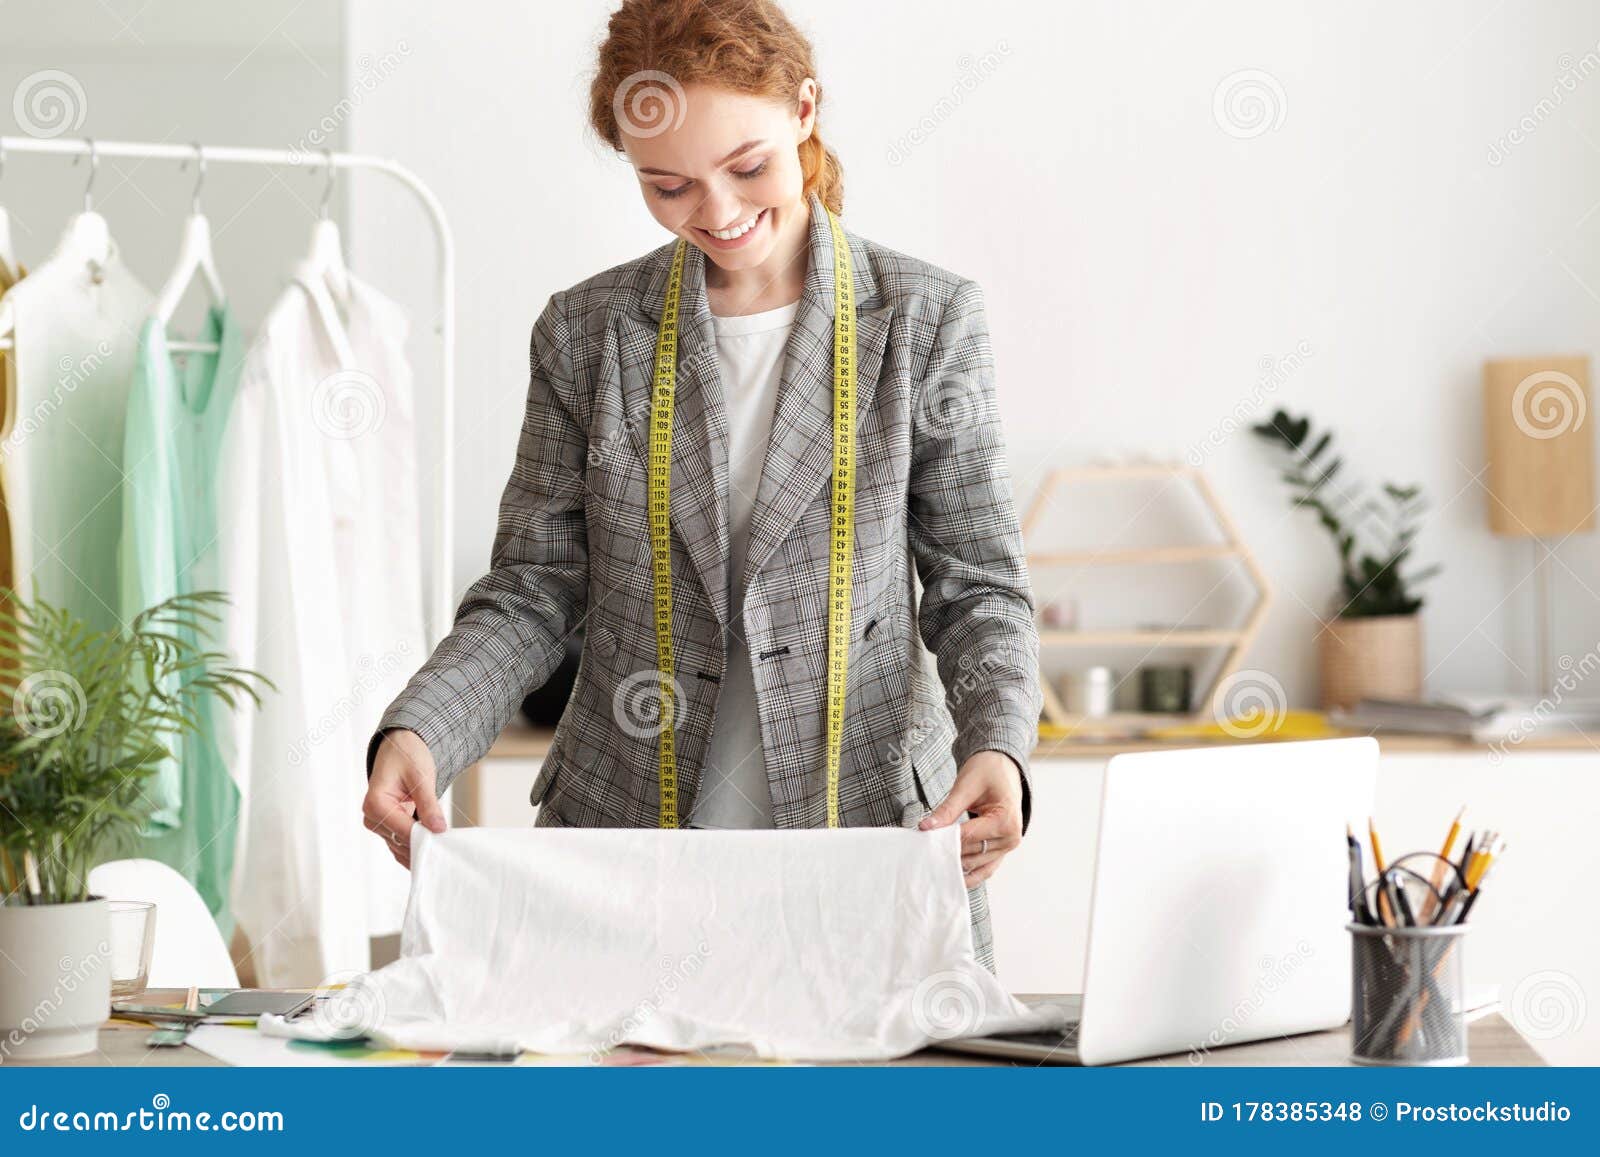 Happy Tailor Girl Working on a New Garment Stock Photo - Image of ...